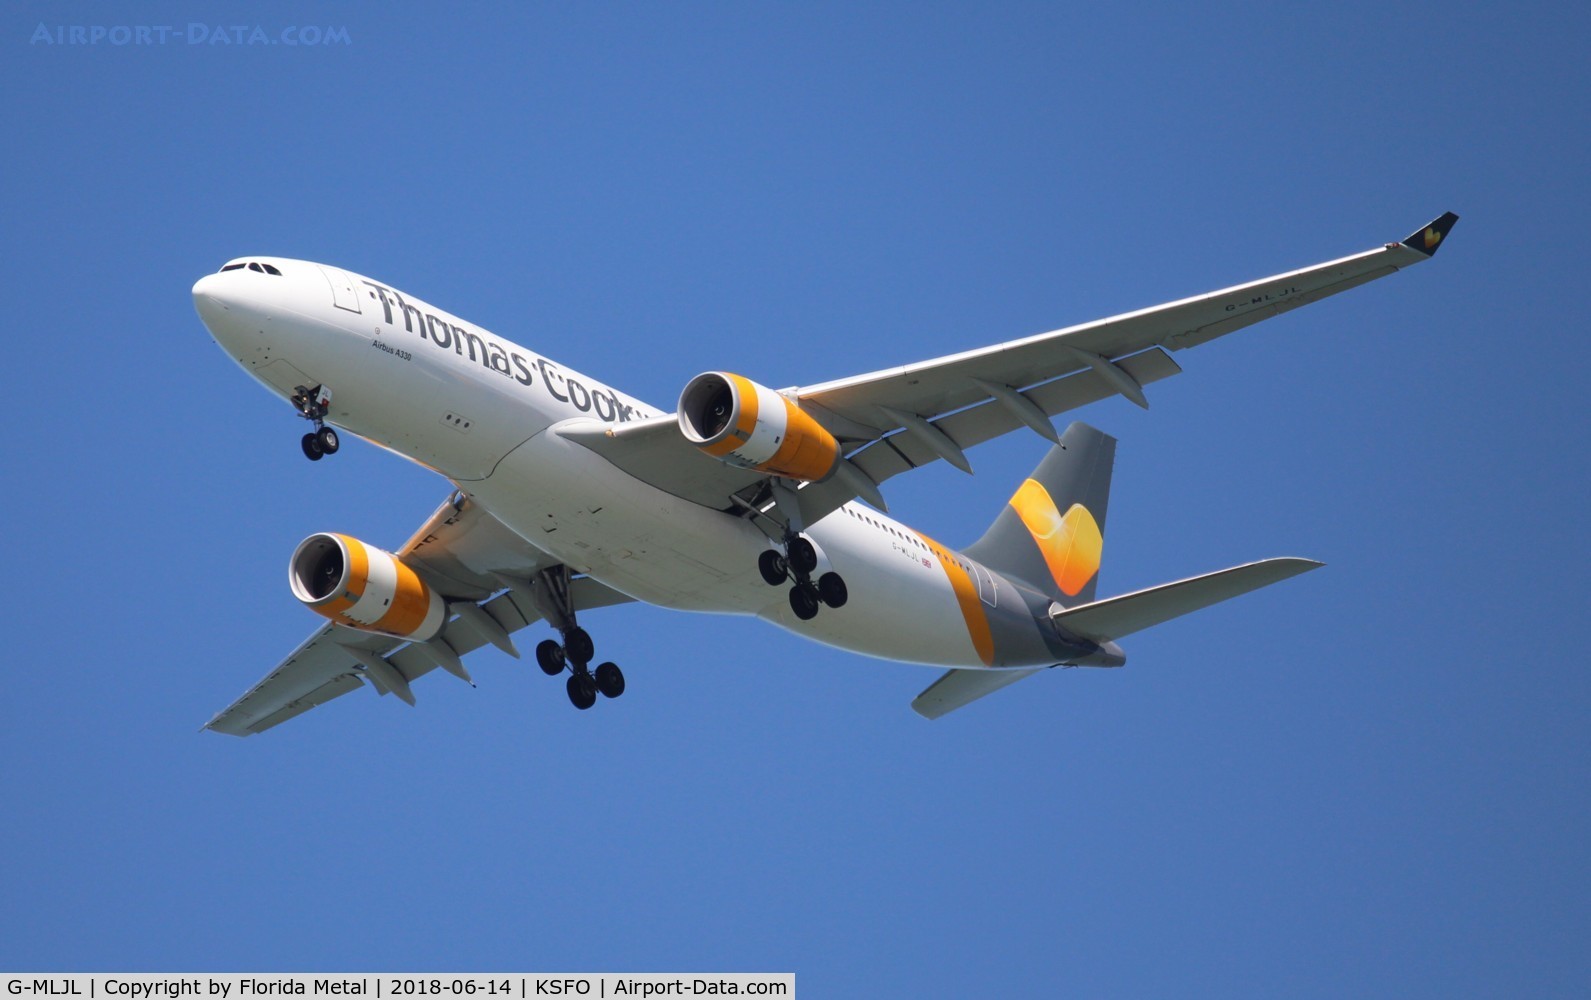 G-MLJL, 1999 Airbus A330-243 C/N 254, Thomas Cook A332 zx